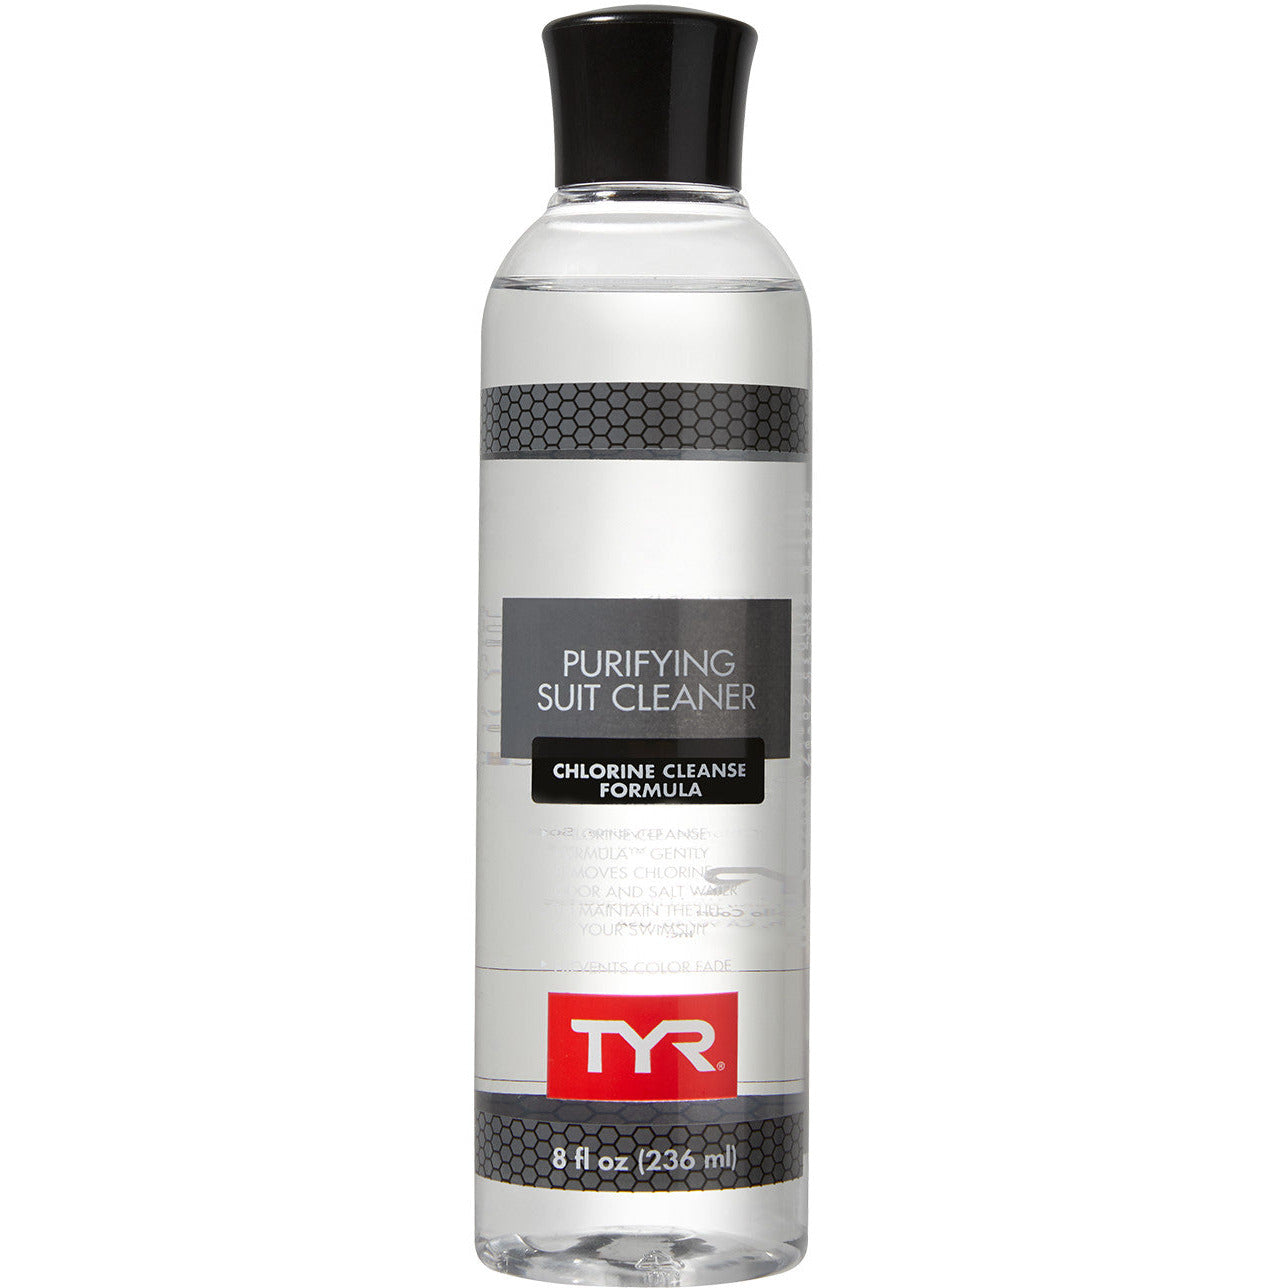 TYR Purifying Suit Cleaner